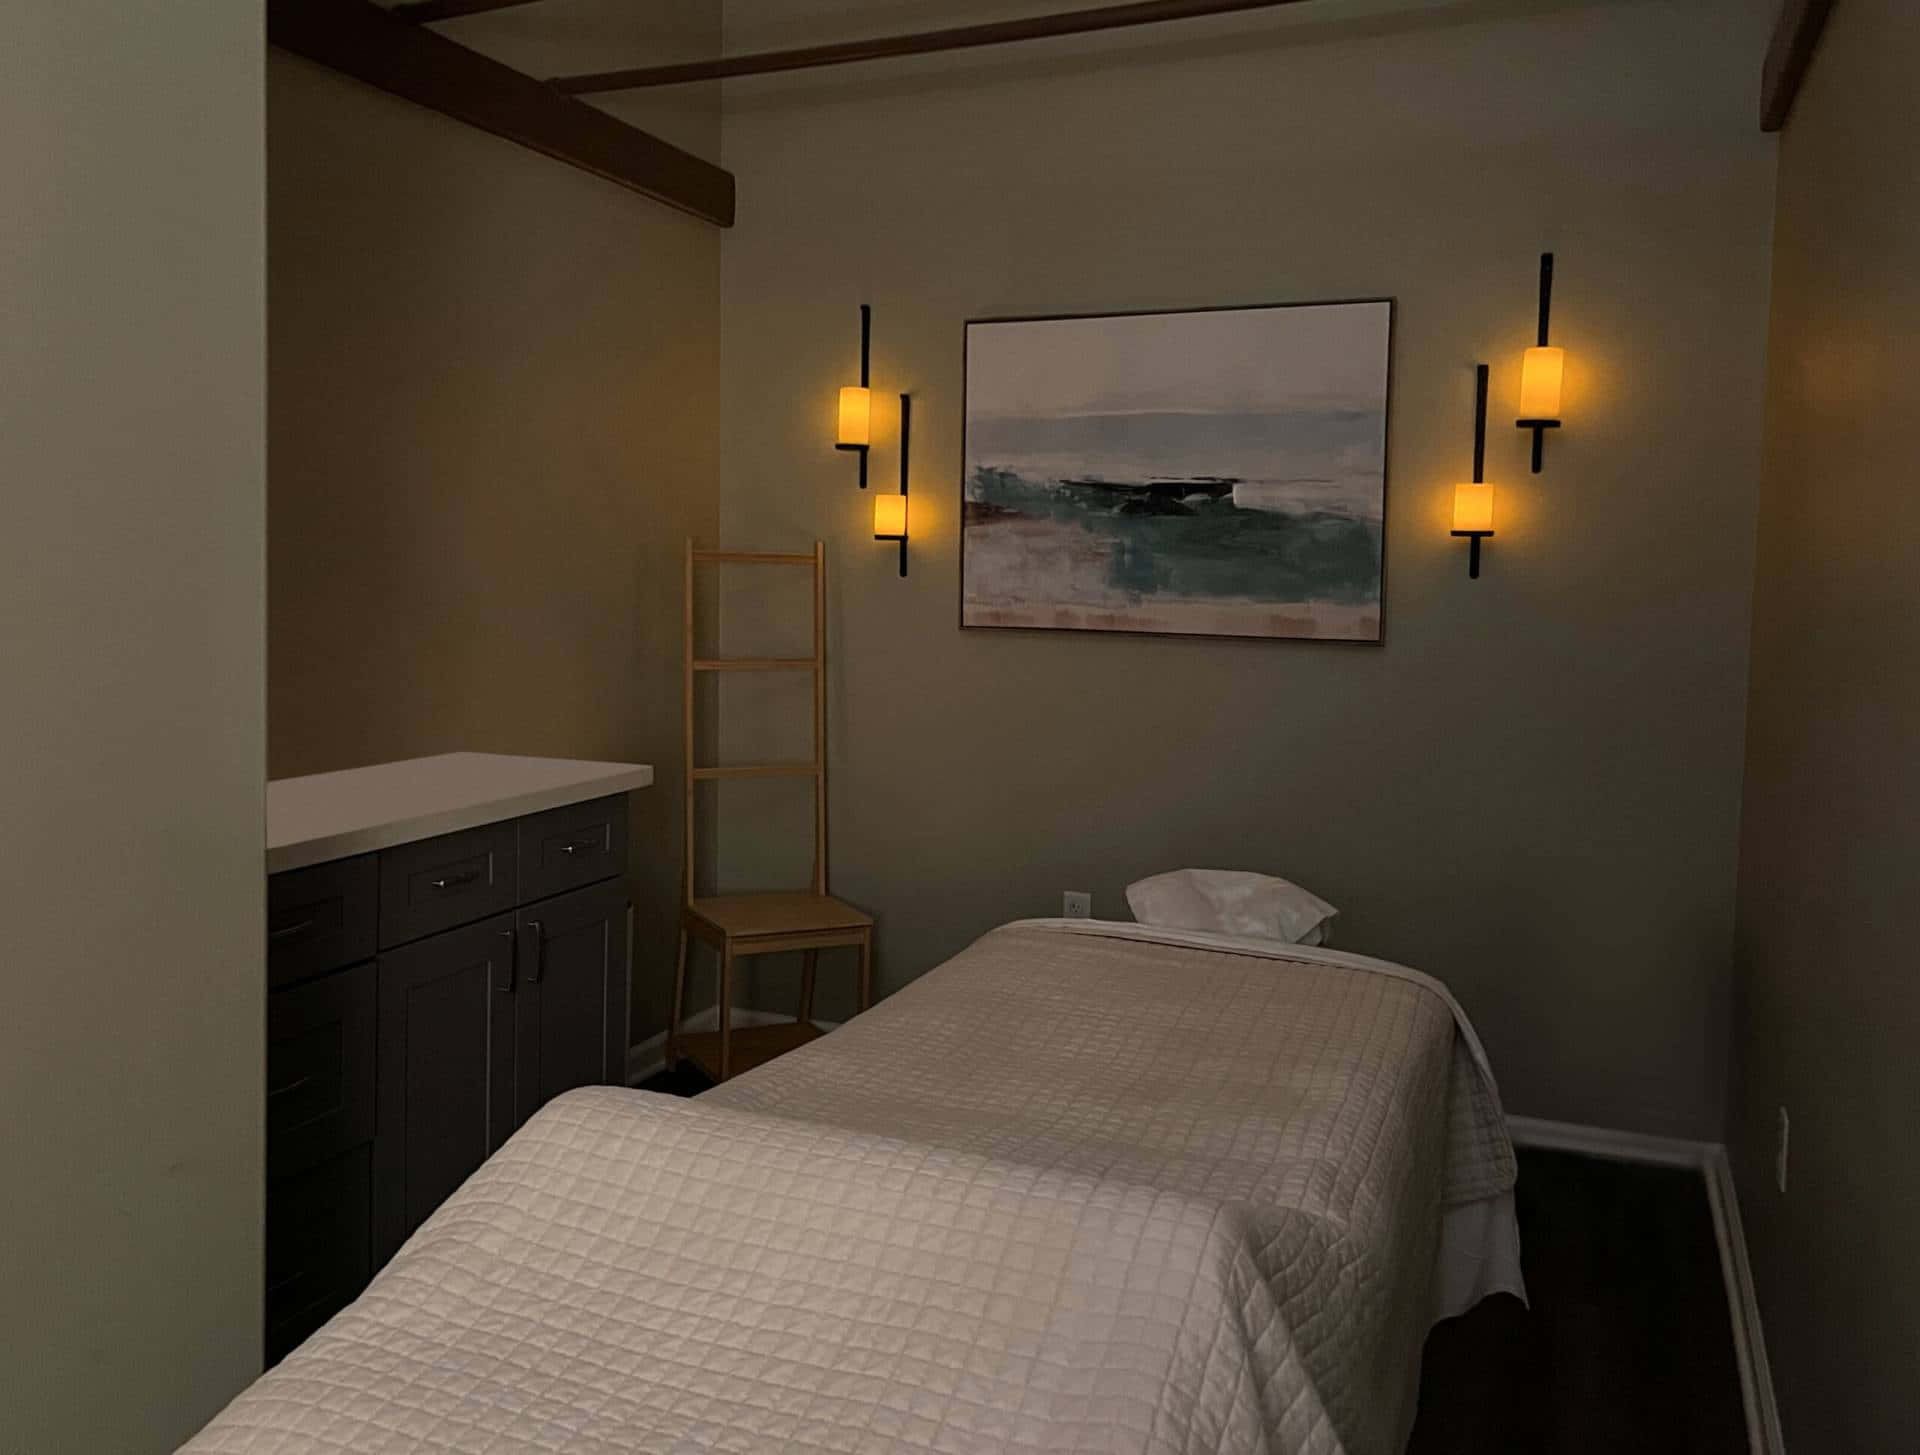 Unwind after a long day in this calming massage room